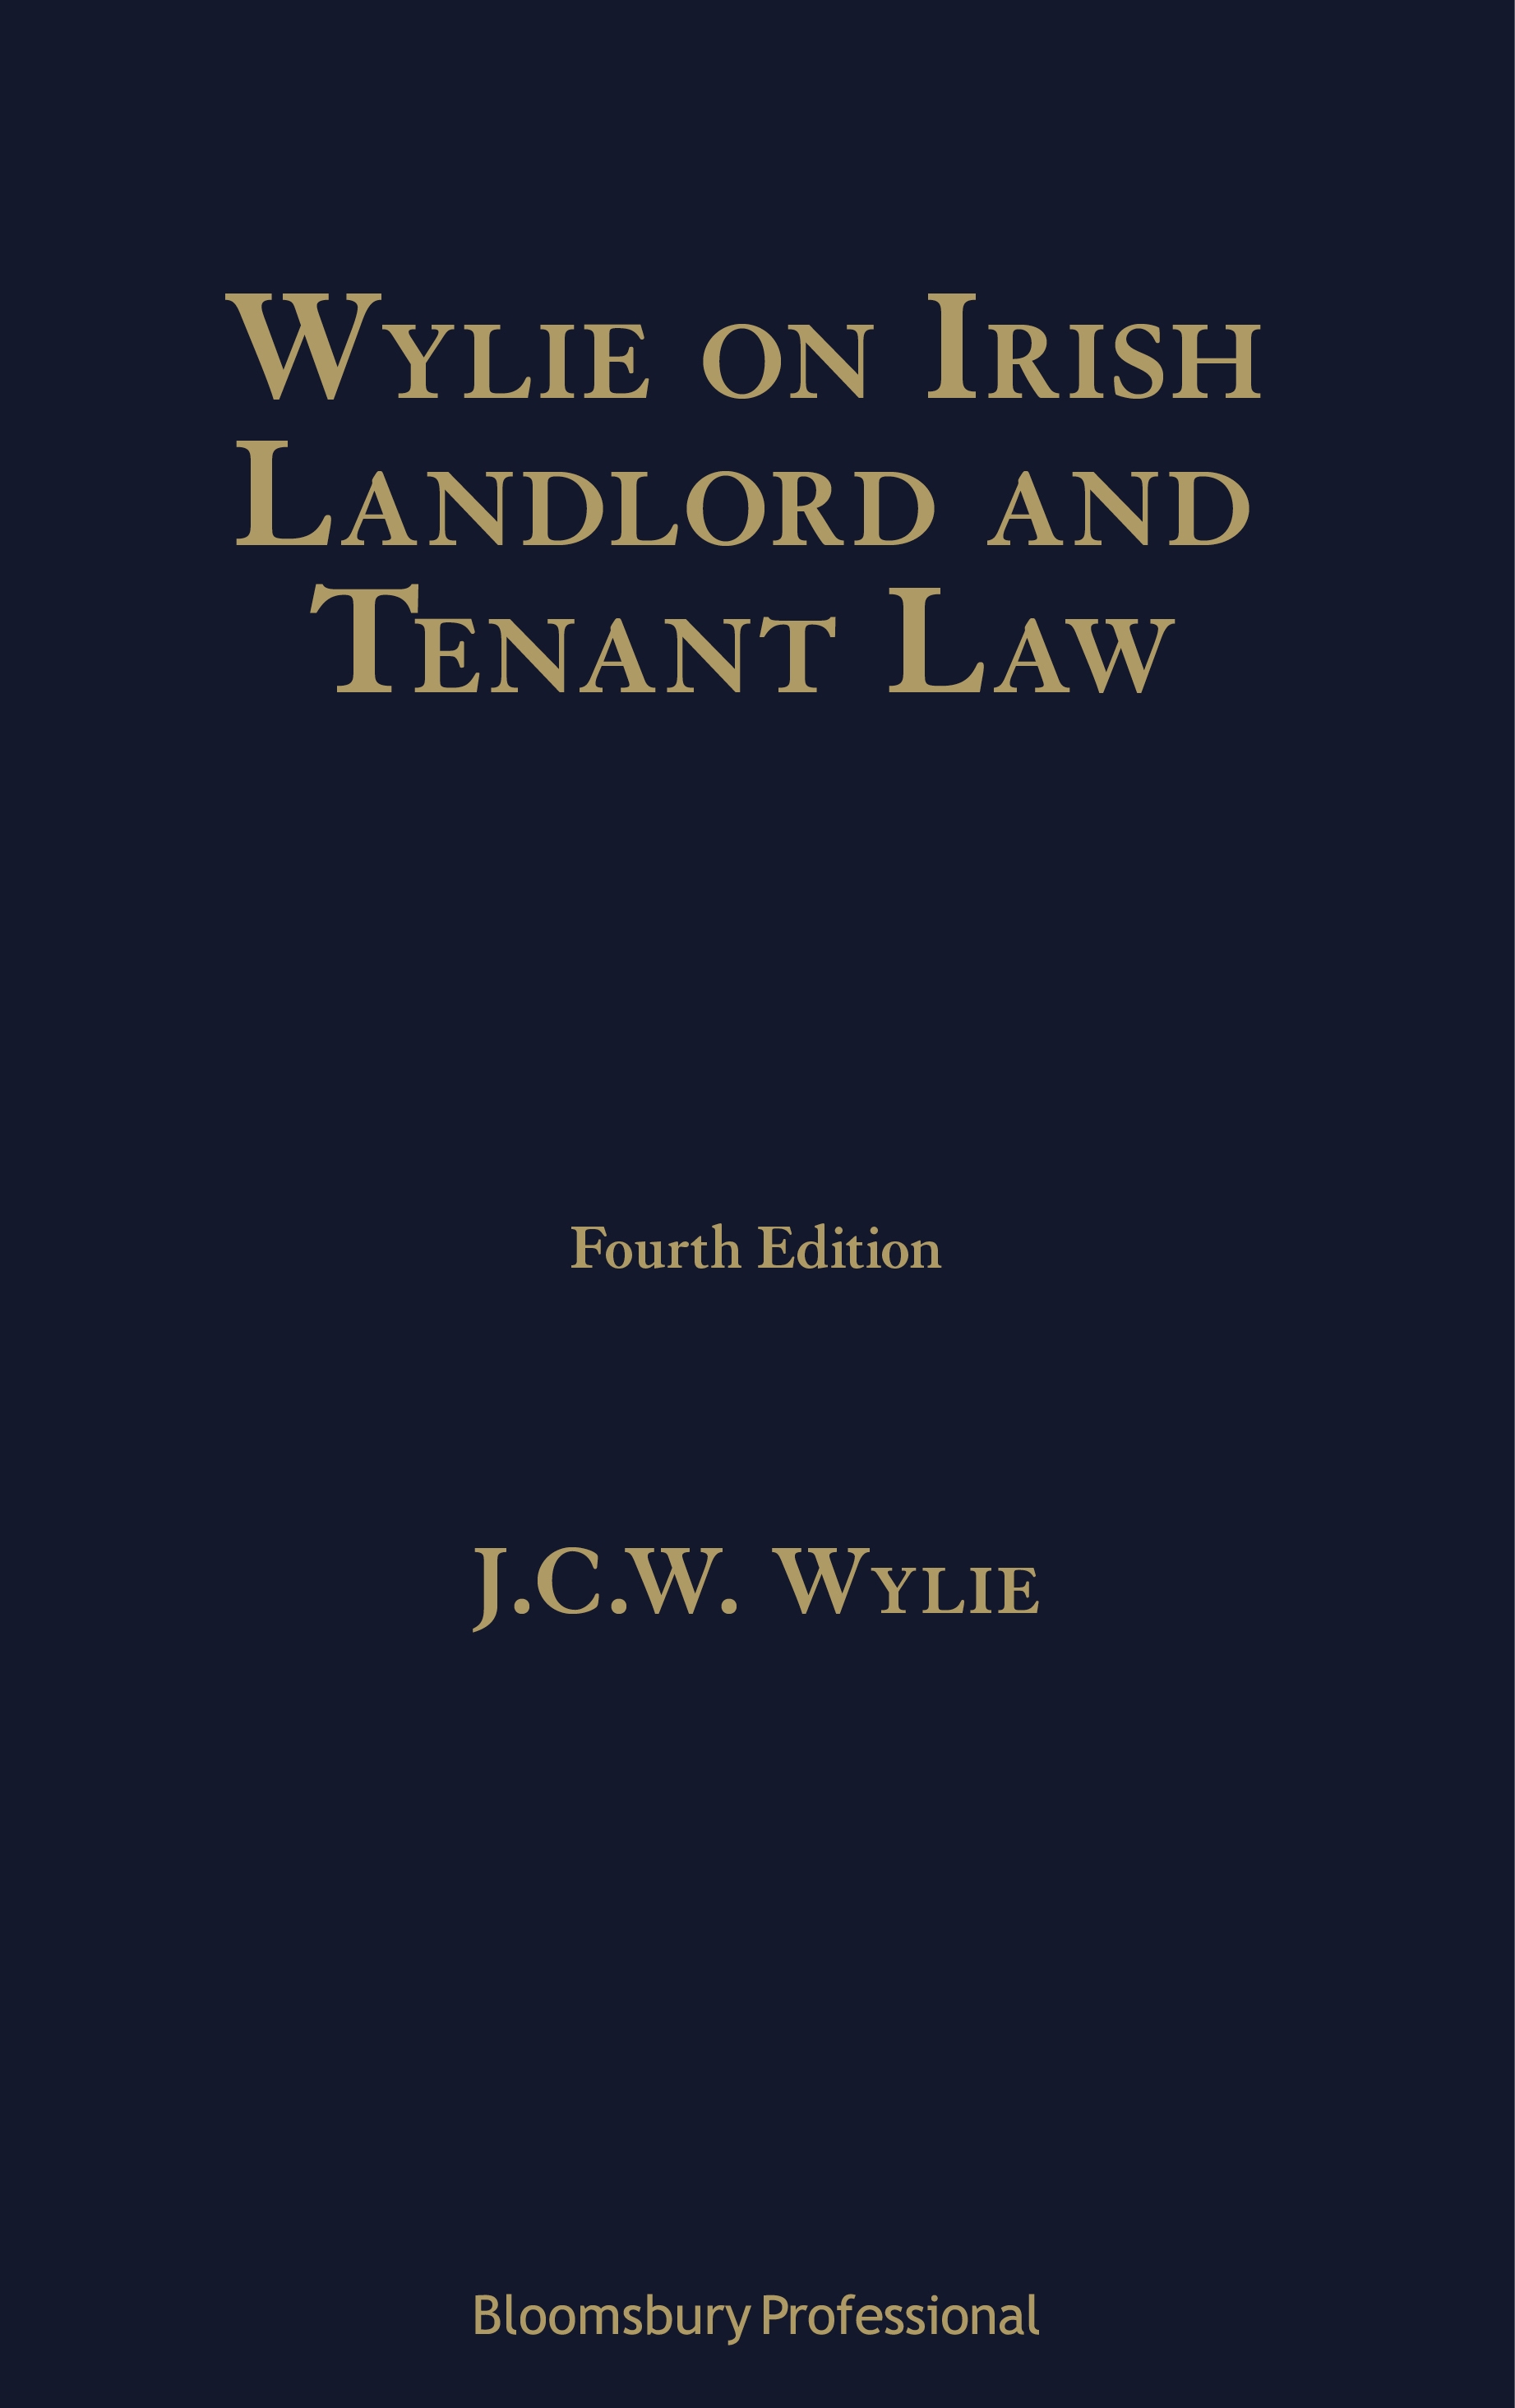 Wylie on Irish Landlord and Tenant Law book jacket